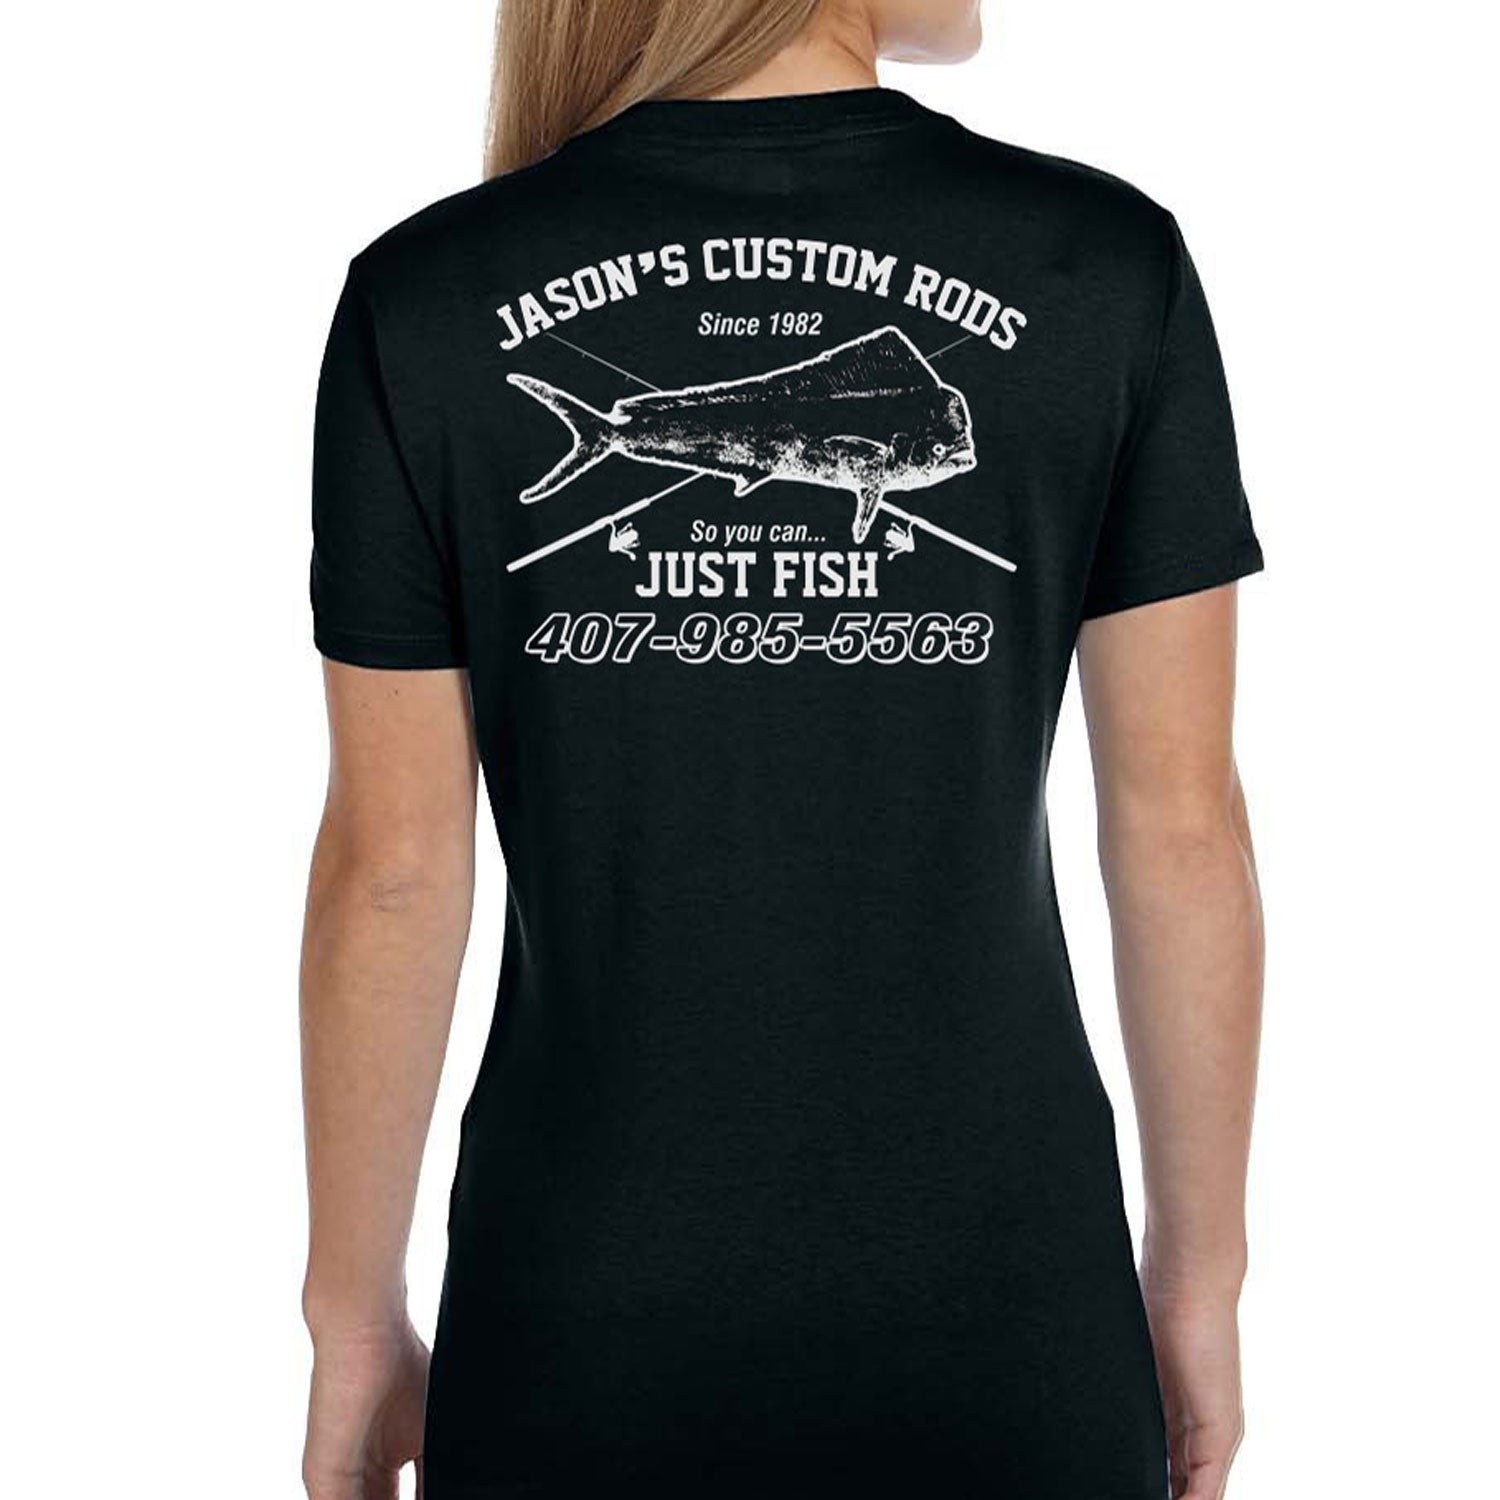 Women's Custom T-Shirt: Vintage Distressed Fish and Rods